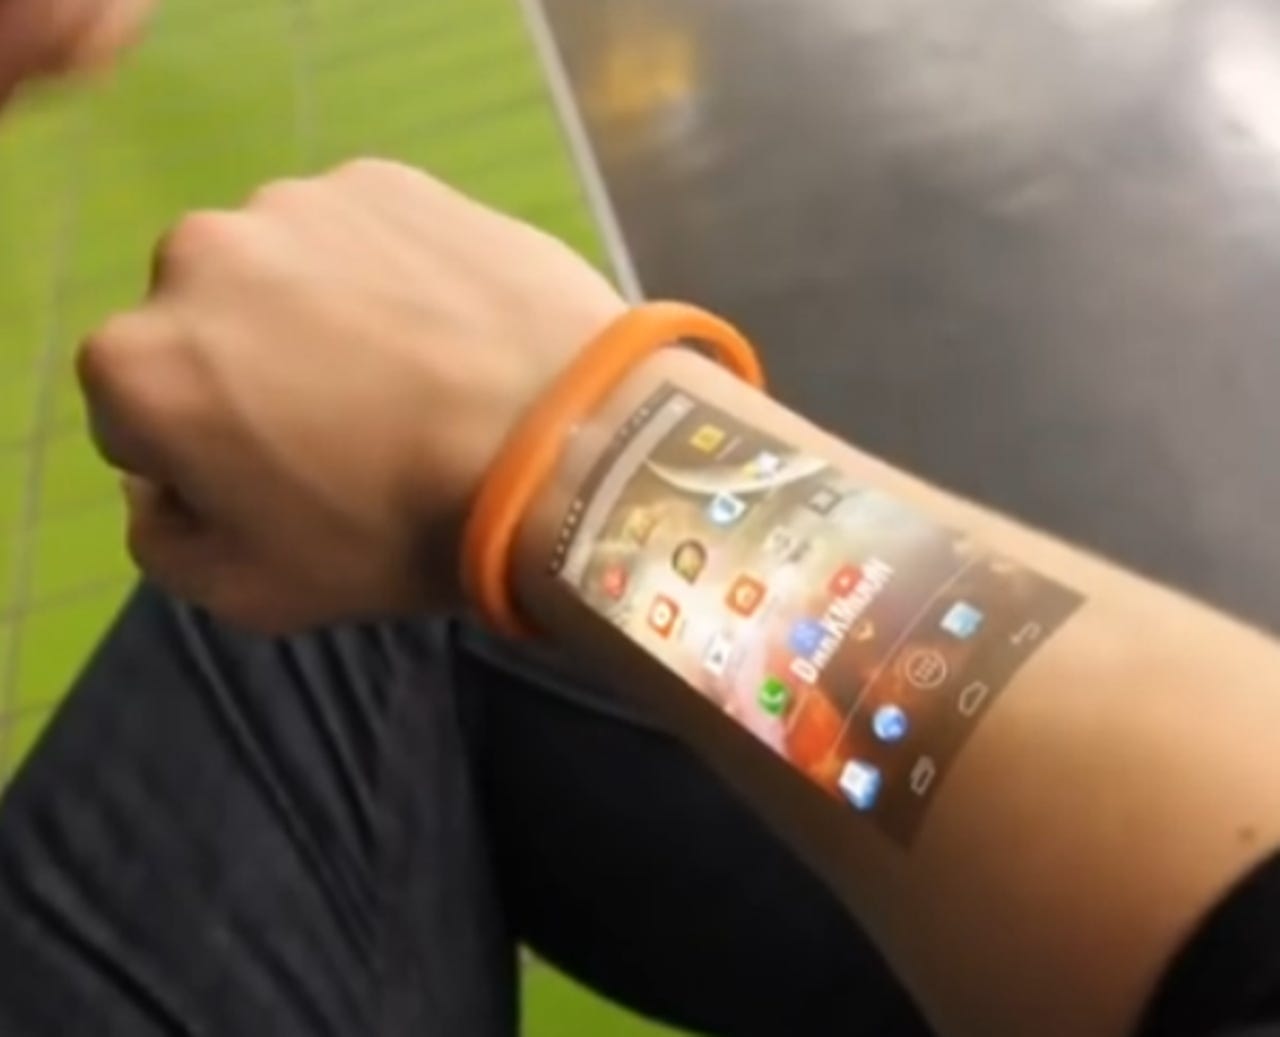 postzegel Kolibrie garen Cicret wearable aims to turn your skin into your tablet - but is it hype or  reality? | ZDNET